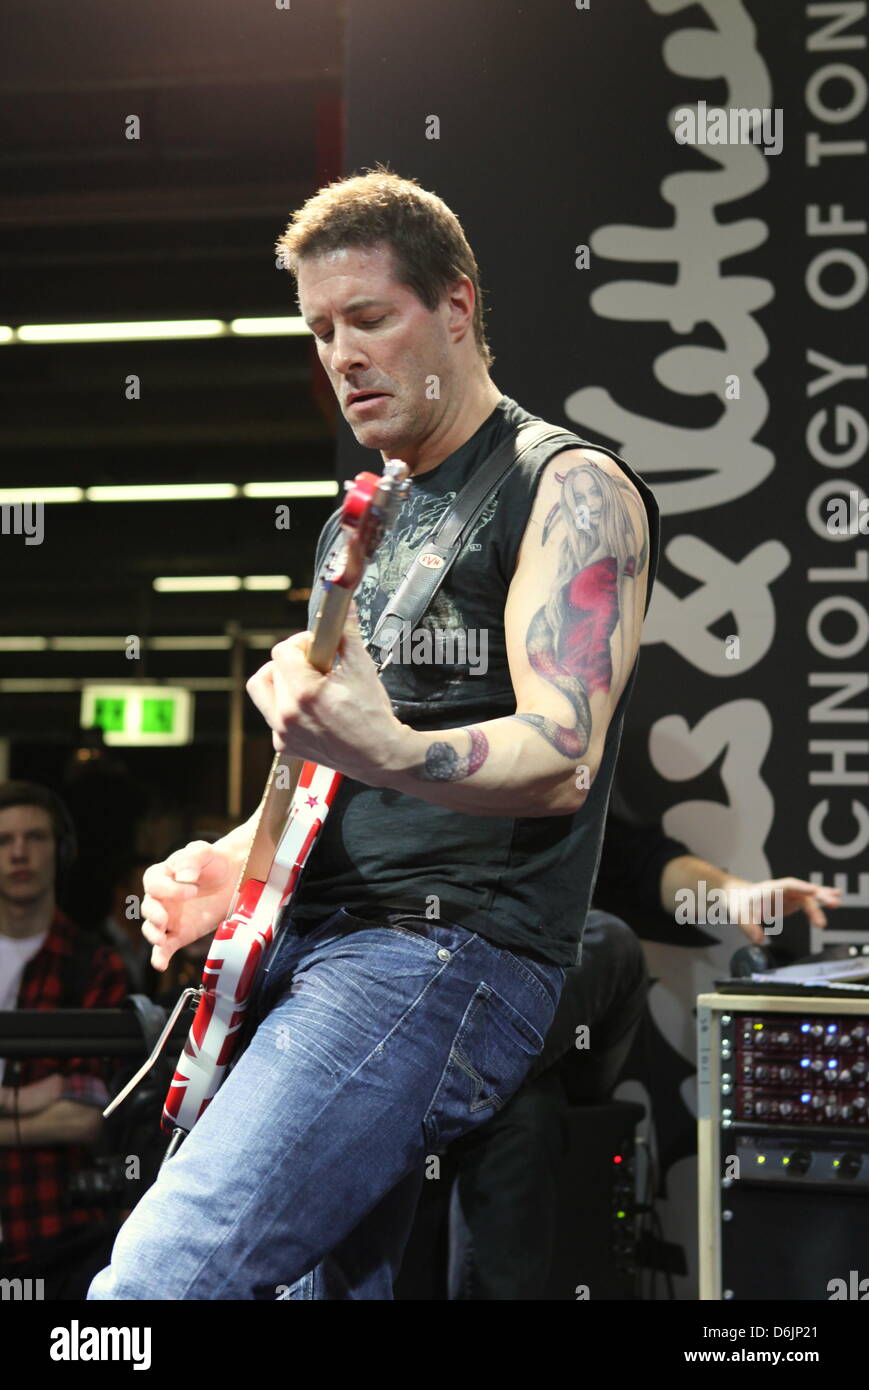 Jeff Waters, Canadian guitarist and producer of the thrash metal band  Annihilator, plays a short set at the Musikmesse in Frankfurt Main,  Germany, 22 March 2012. Photo: Susannah V. Vergau Stock Photo - Alamy